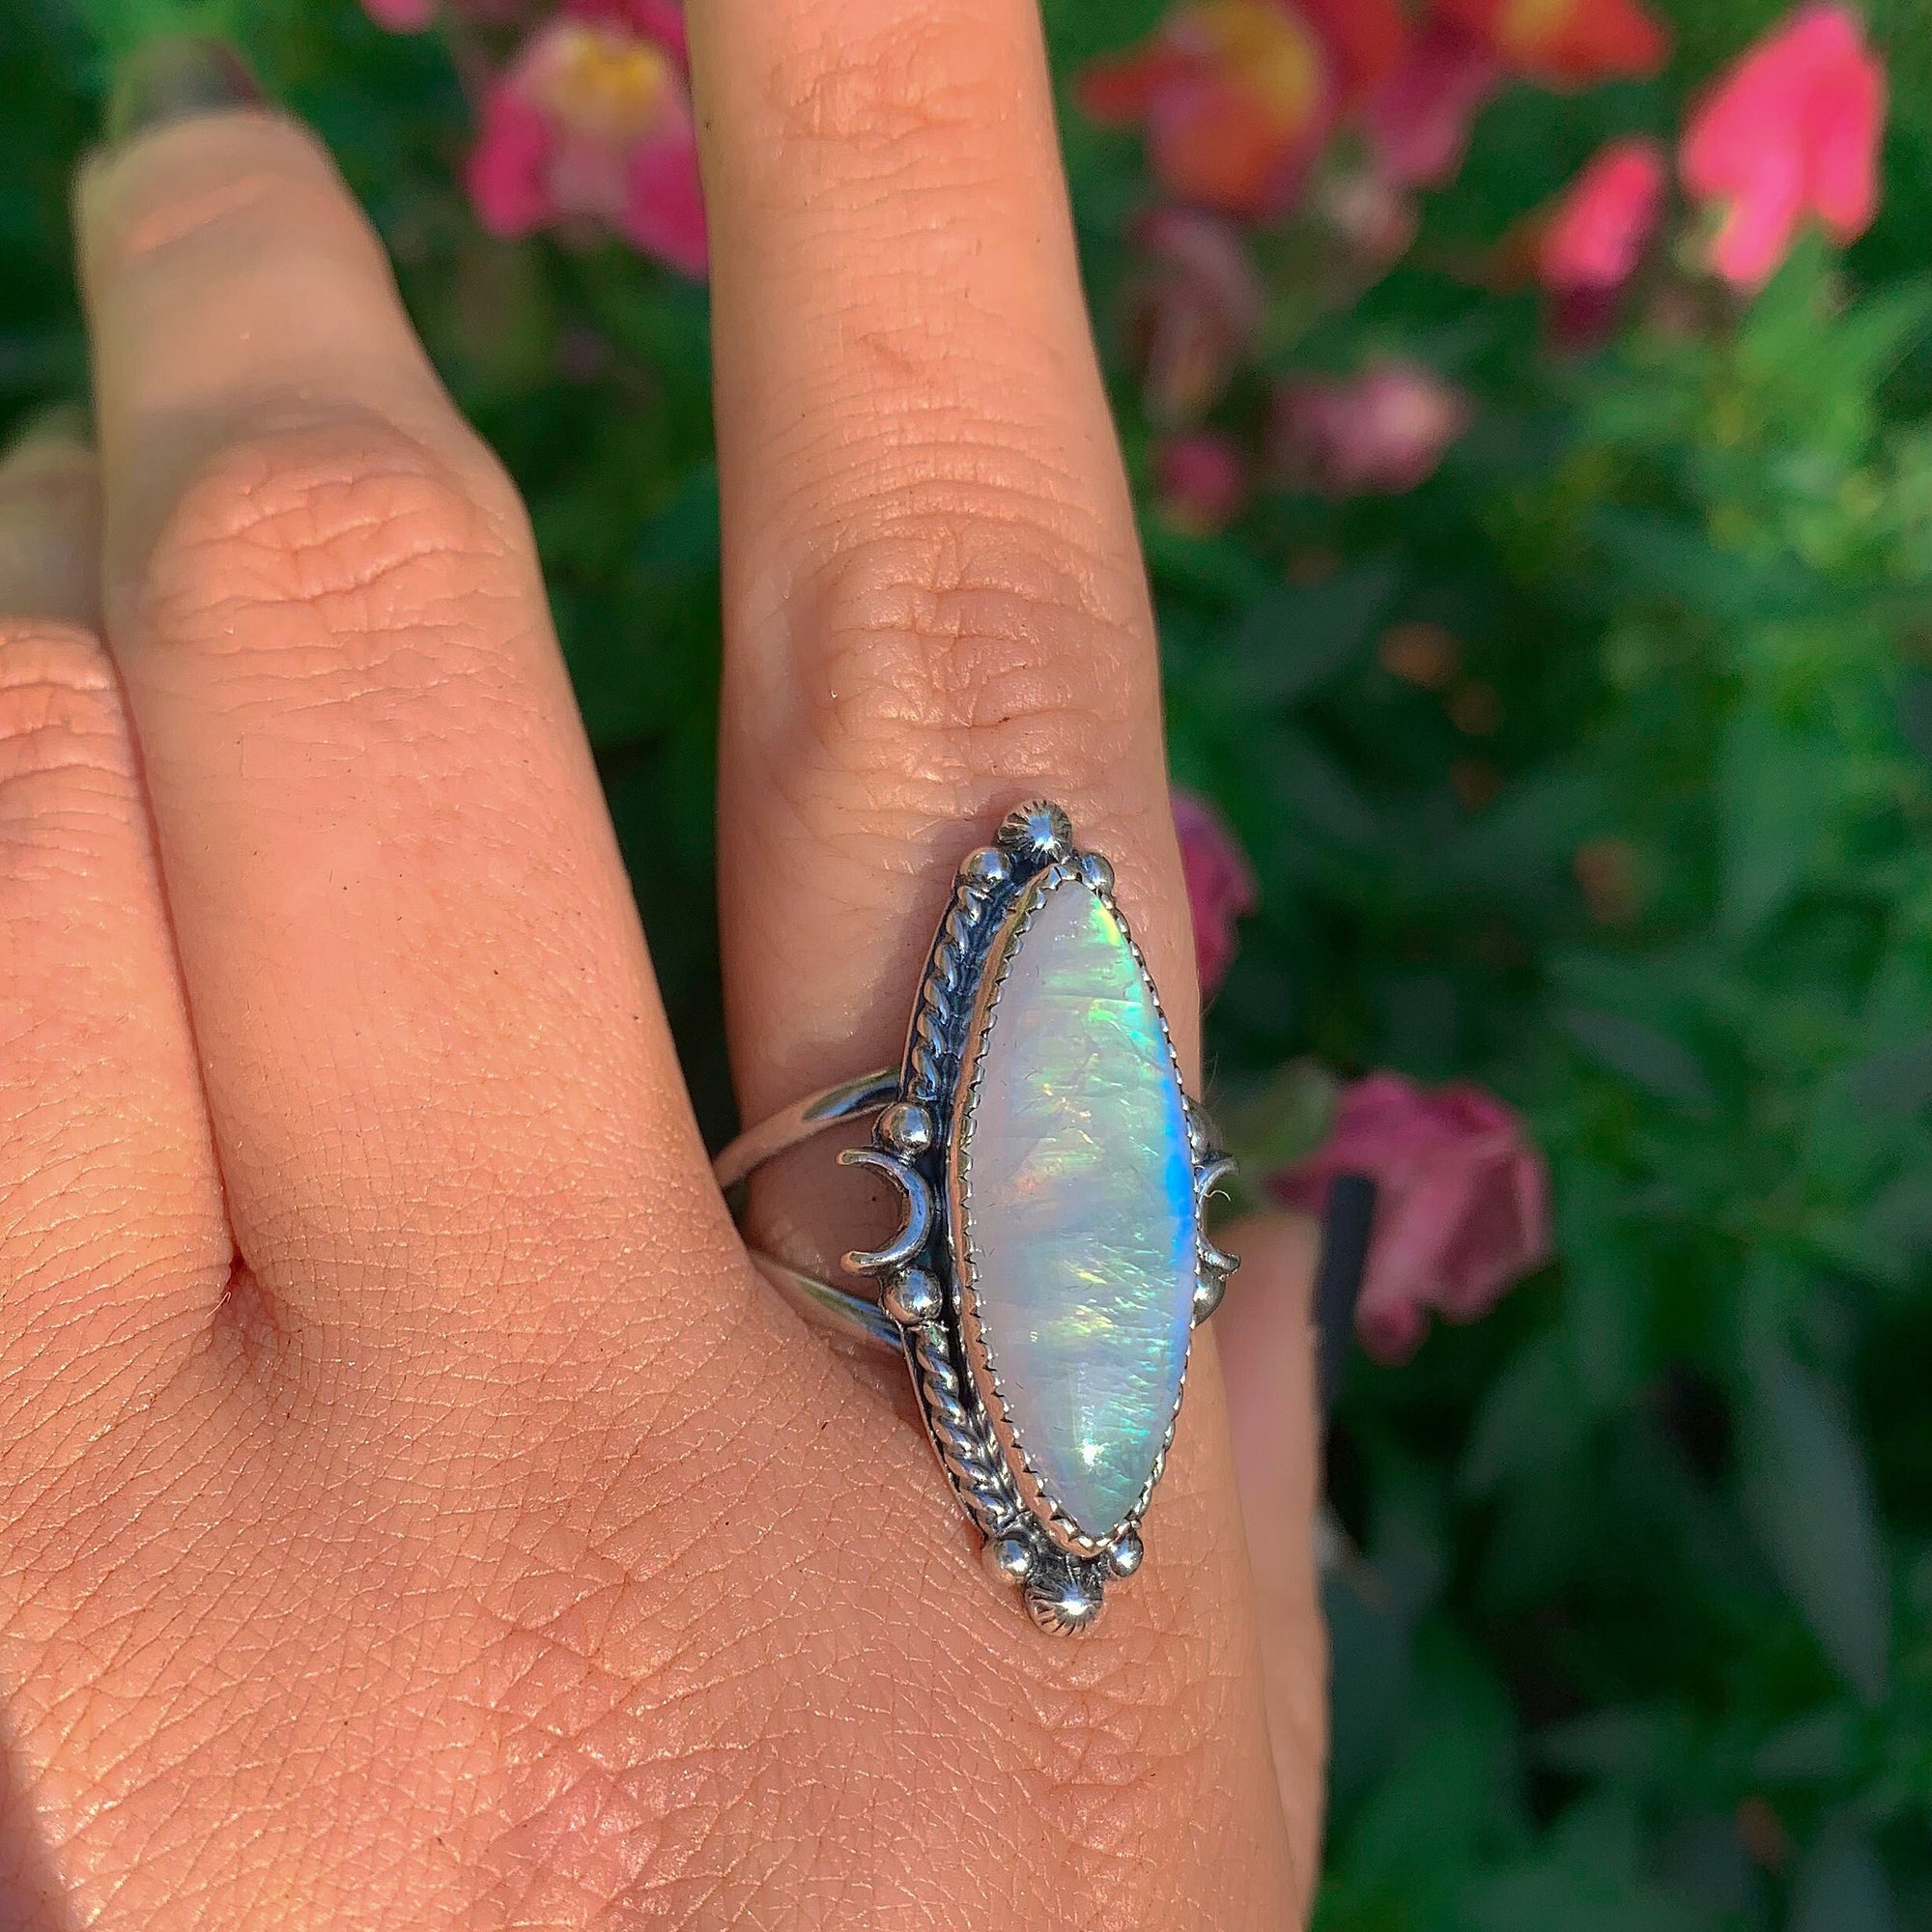 Marquise Moonstone Ring - Size 11 - Sterling Silver - Rainbow Moonstone Jewelry - Flashy Moonstone Jewellery - Crescent Moon Ring Celestial